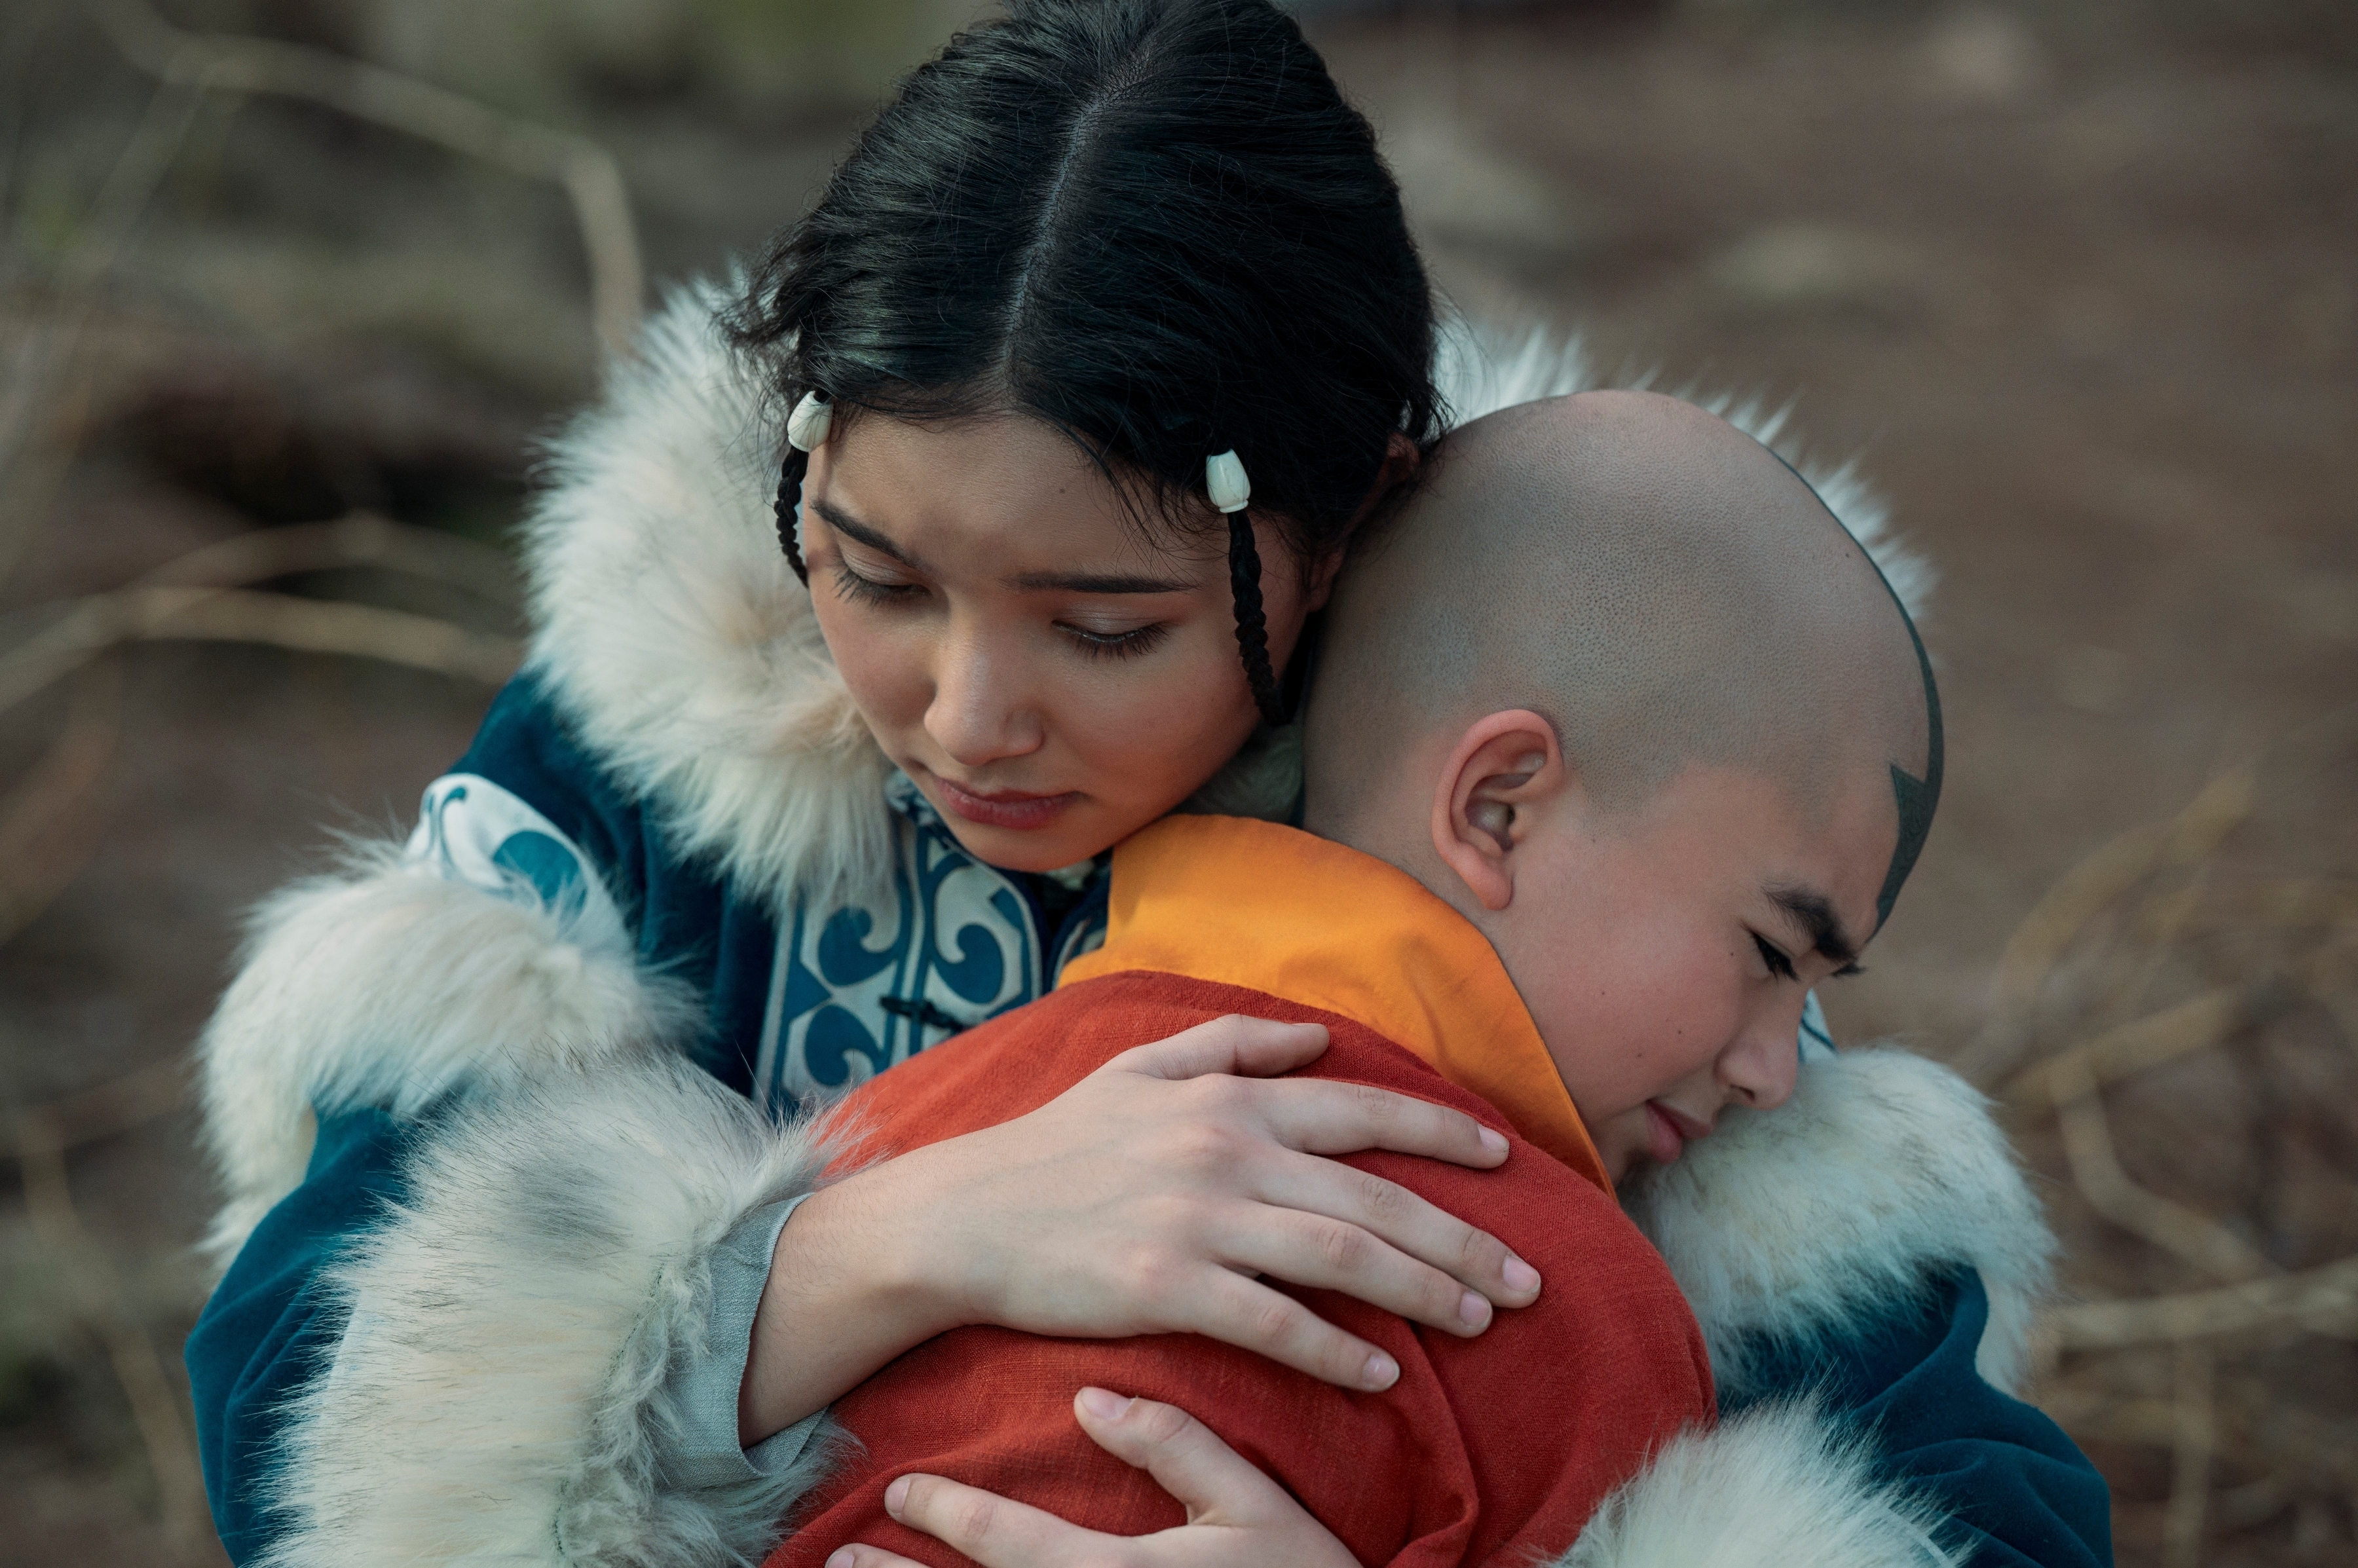 Katara comforts Aang in a scene from &#x27;Avatar: The Last Airbender&#x27;